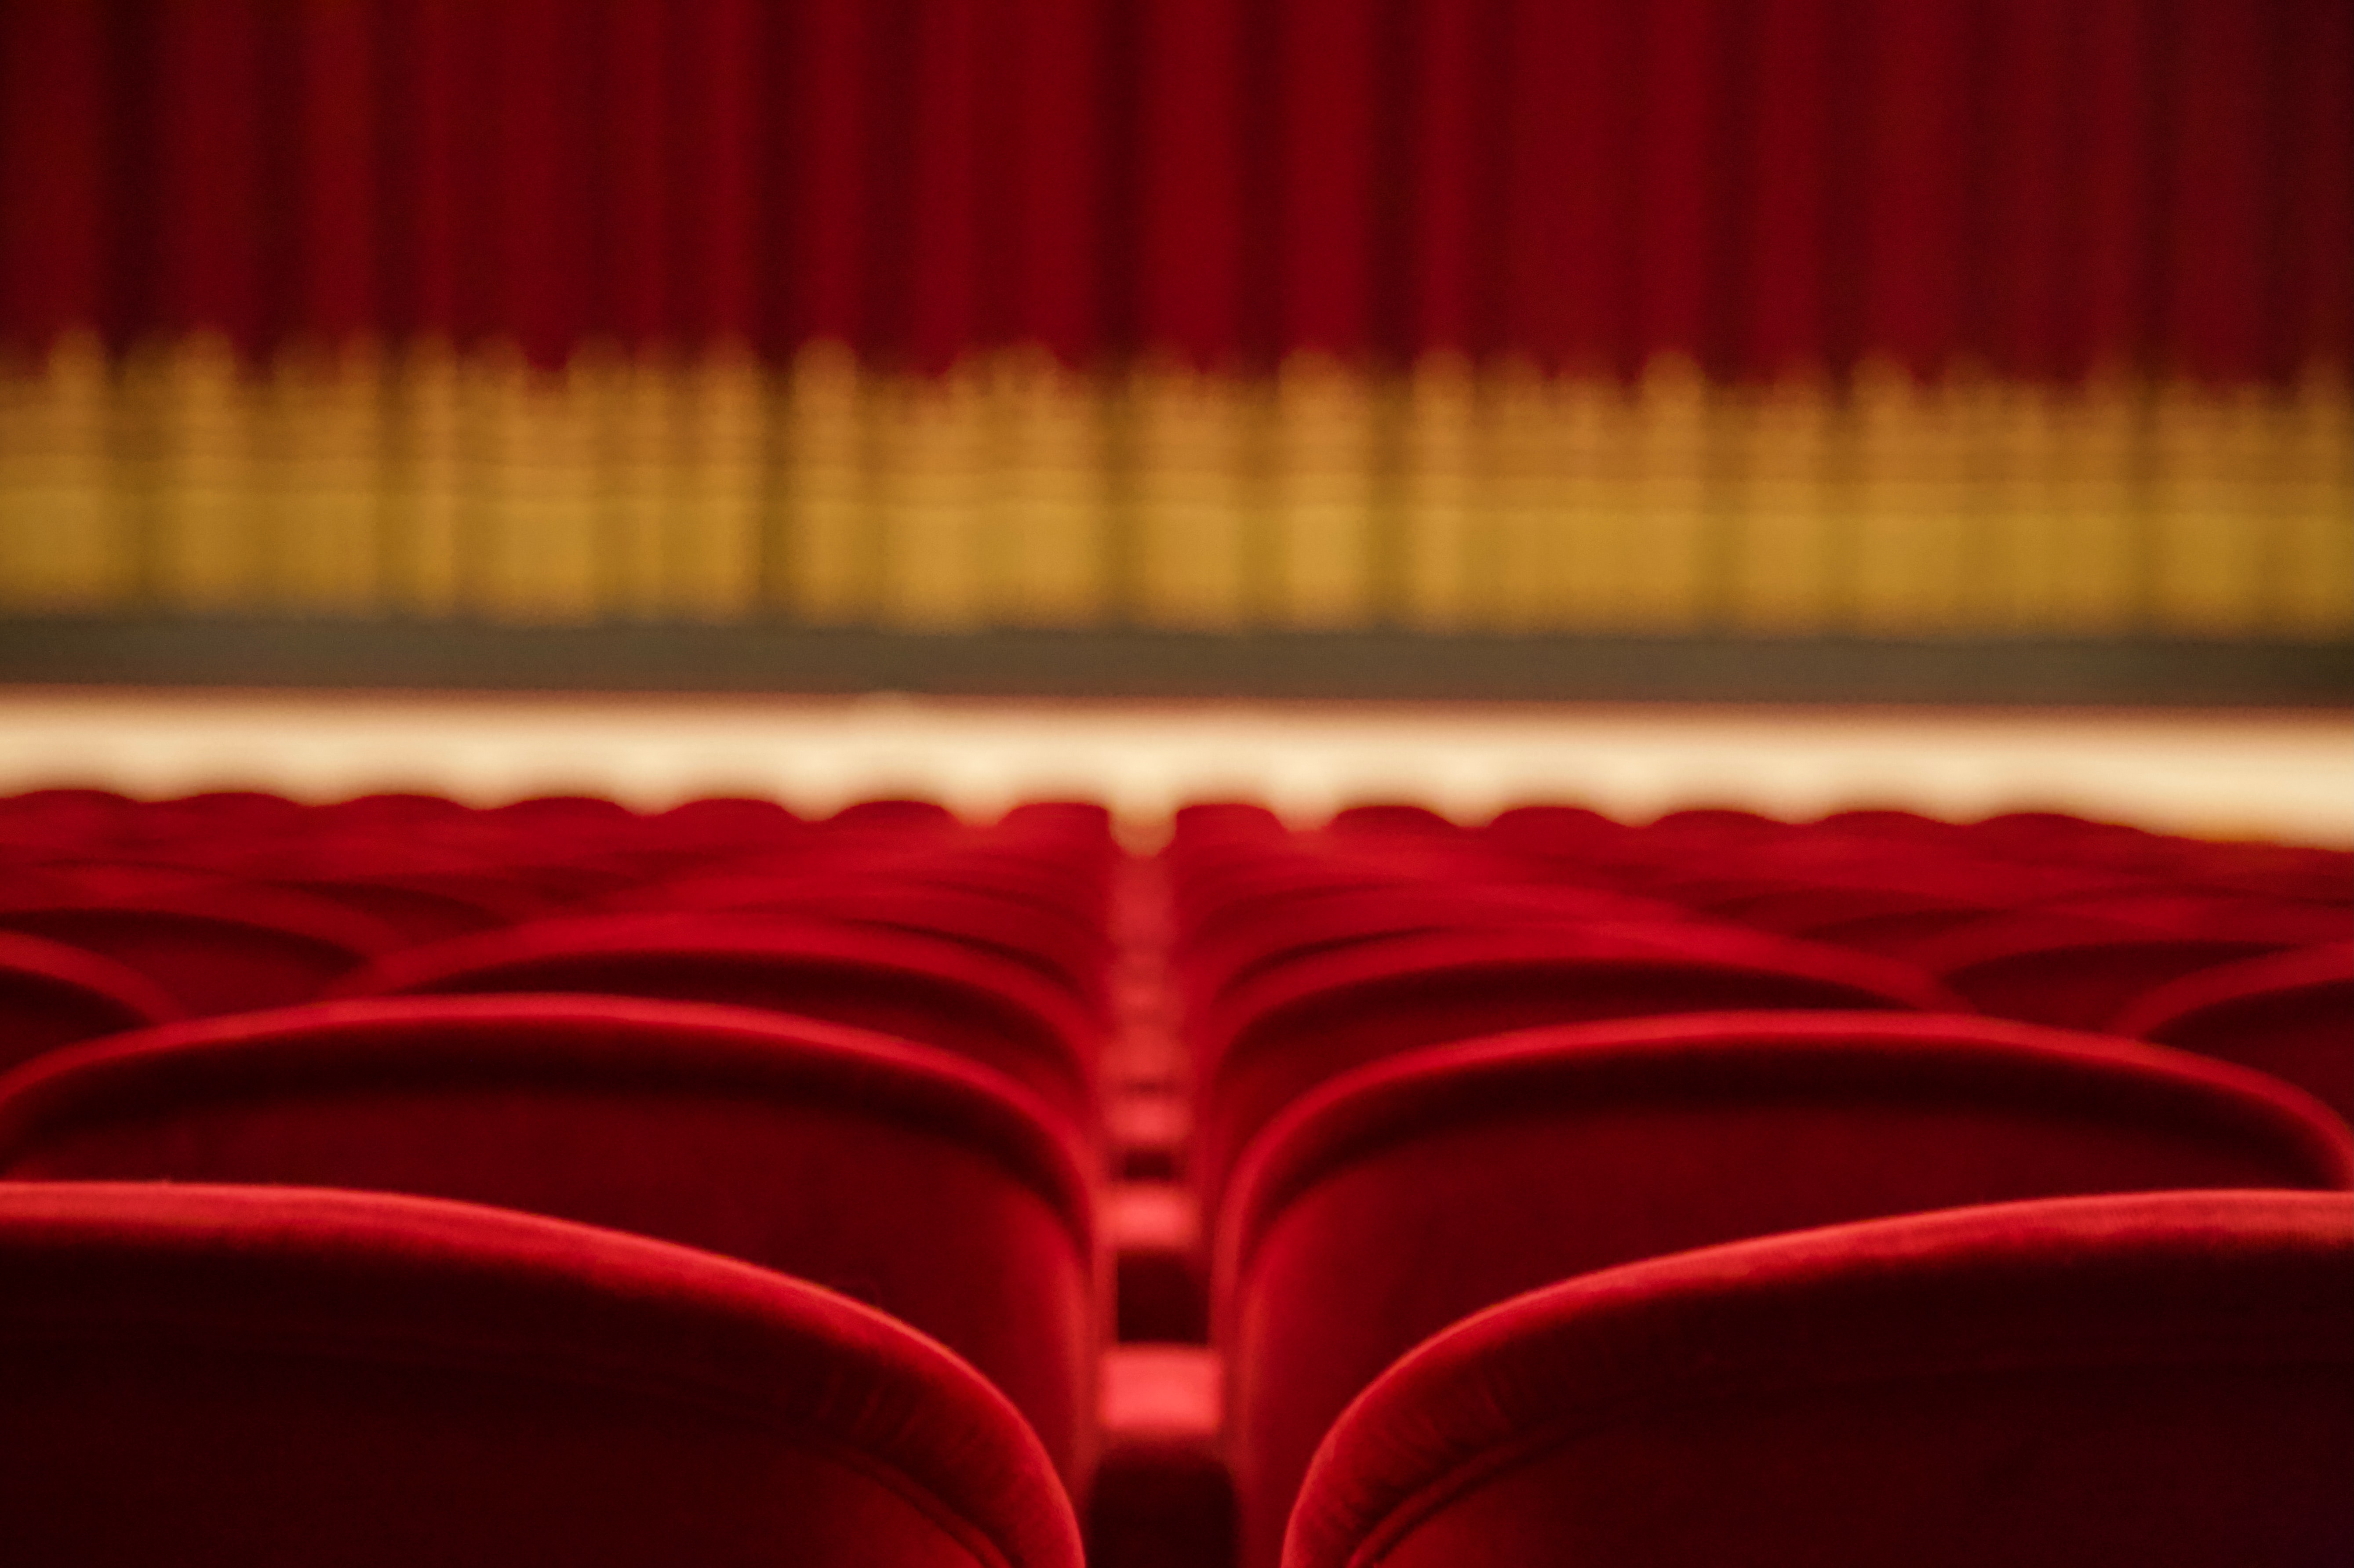 Photo of theatre seats by Paolo Chiabrando, courtesy of Unsplash.